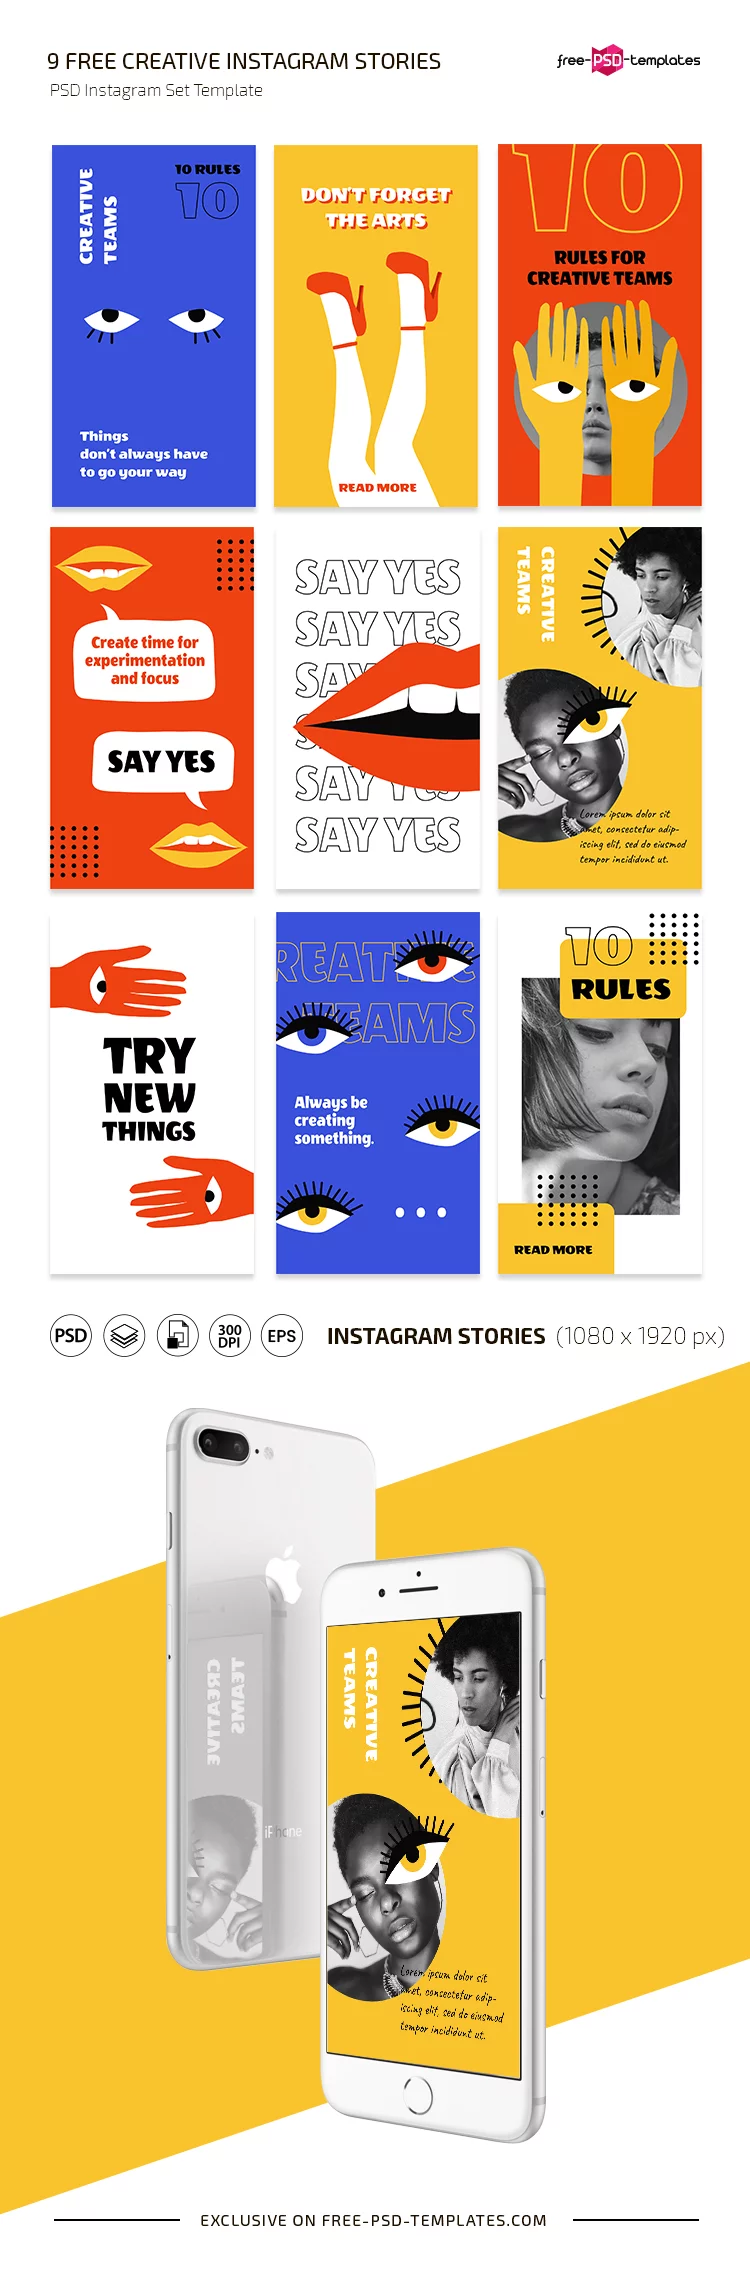 Free Creative Instagram Stories Set Templates in PSD + Vector (.ai+.eps)